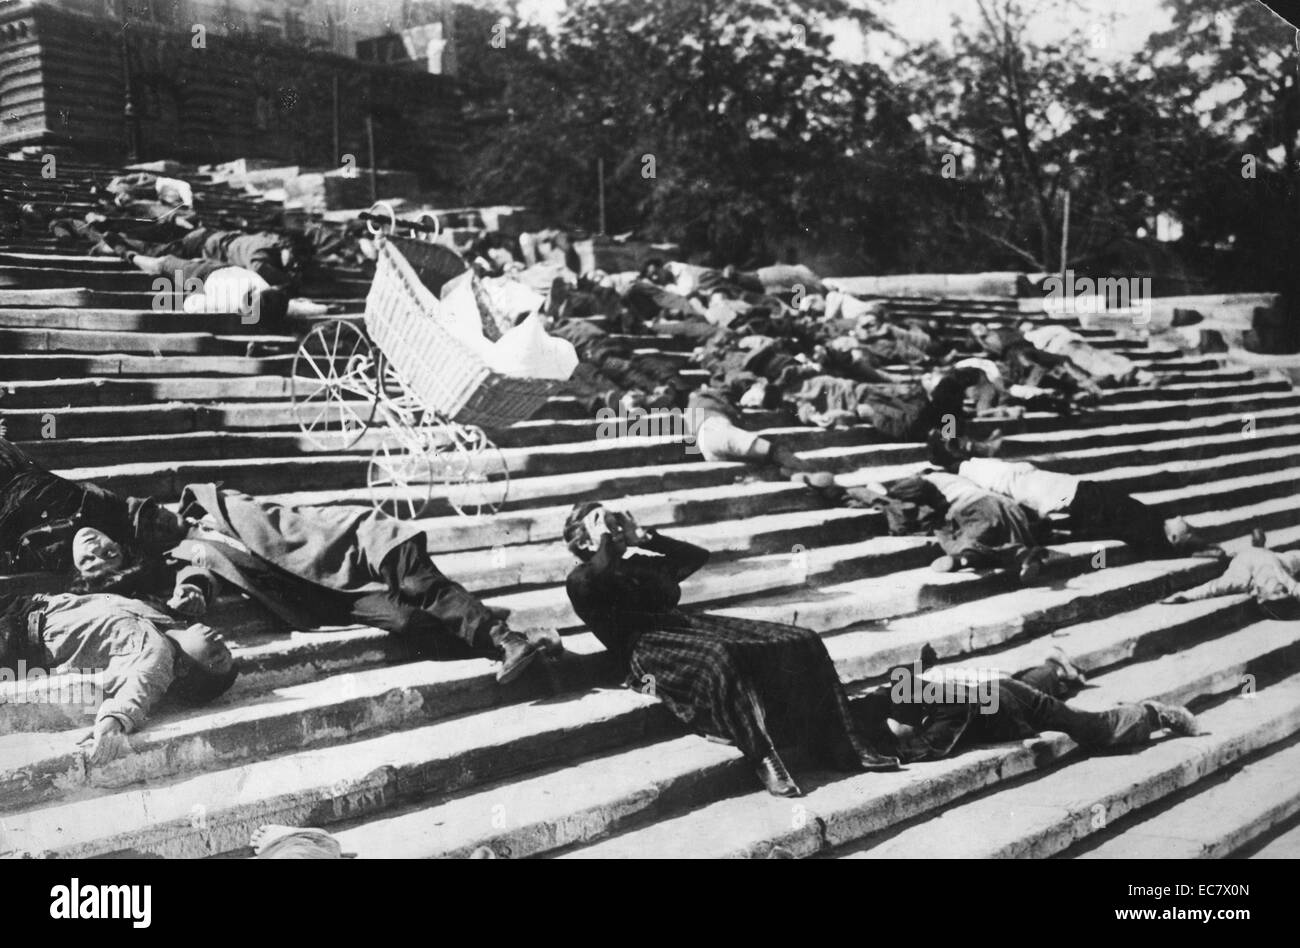 Battleship Potemkin, is a 1925 silent film directed by Sergei Eisenstein. It presents a dramatized version of the mutiny that occurred in 1905 when the crew of the Russian battleship Potemkin rebelled against their officers of the Tsarist regime Stock Photo